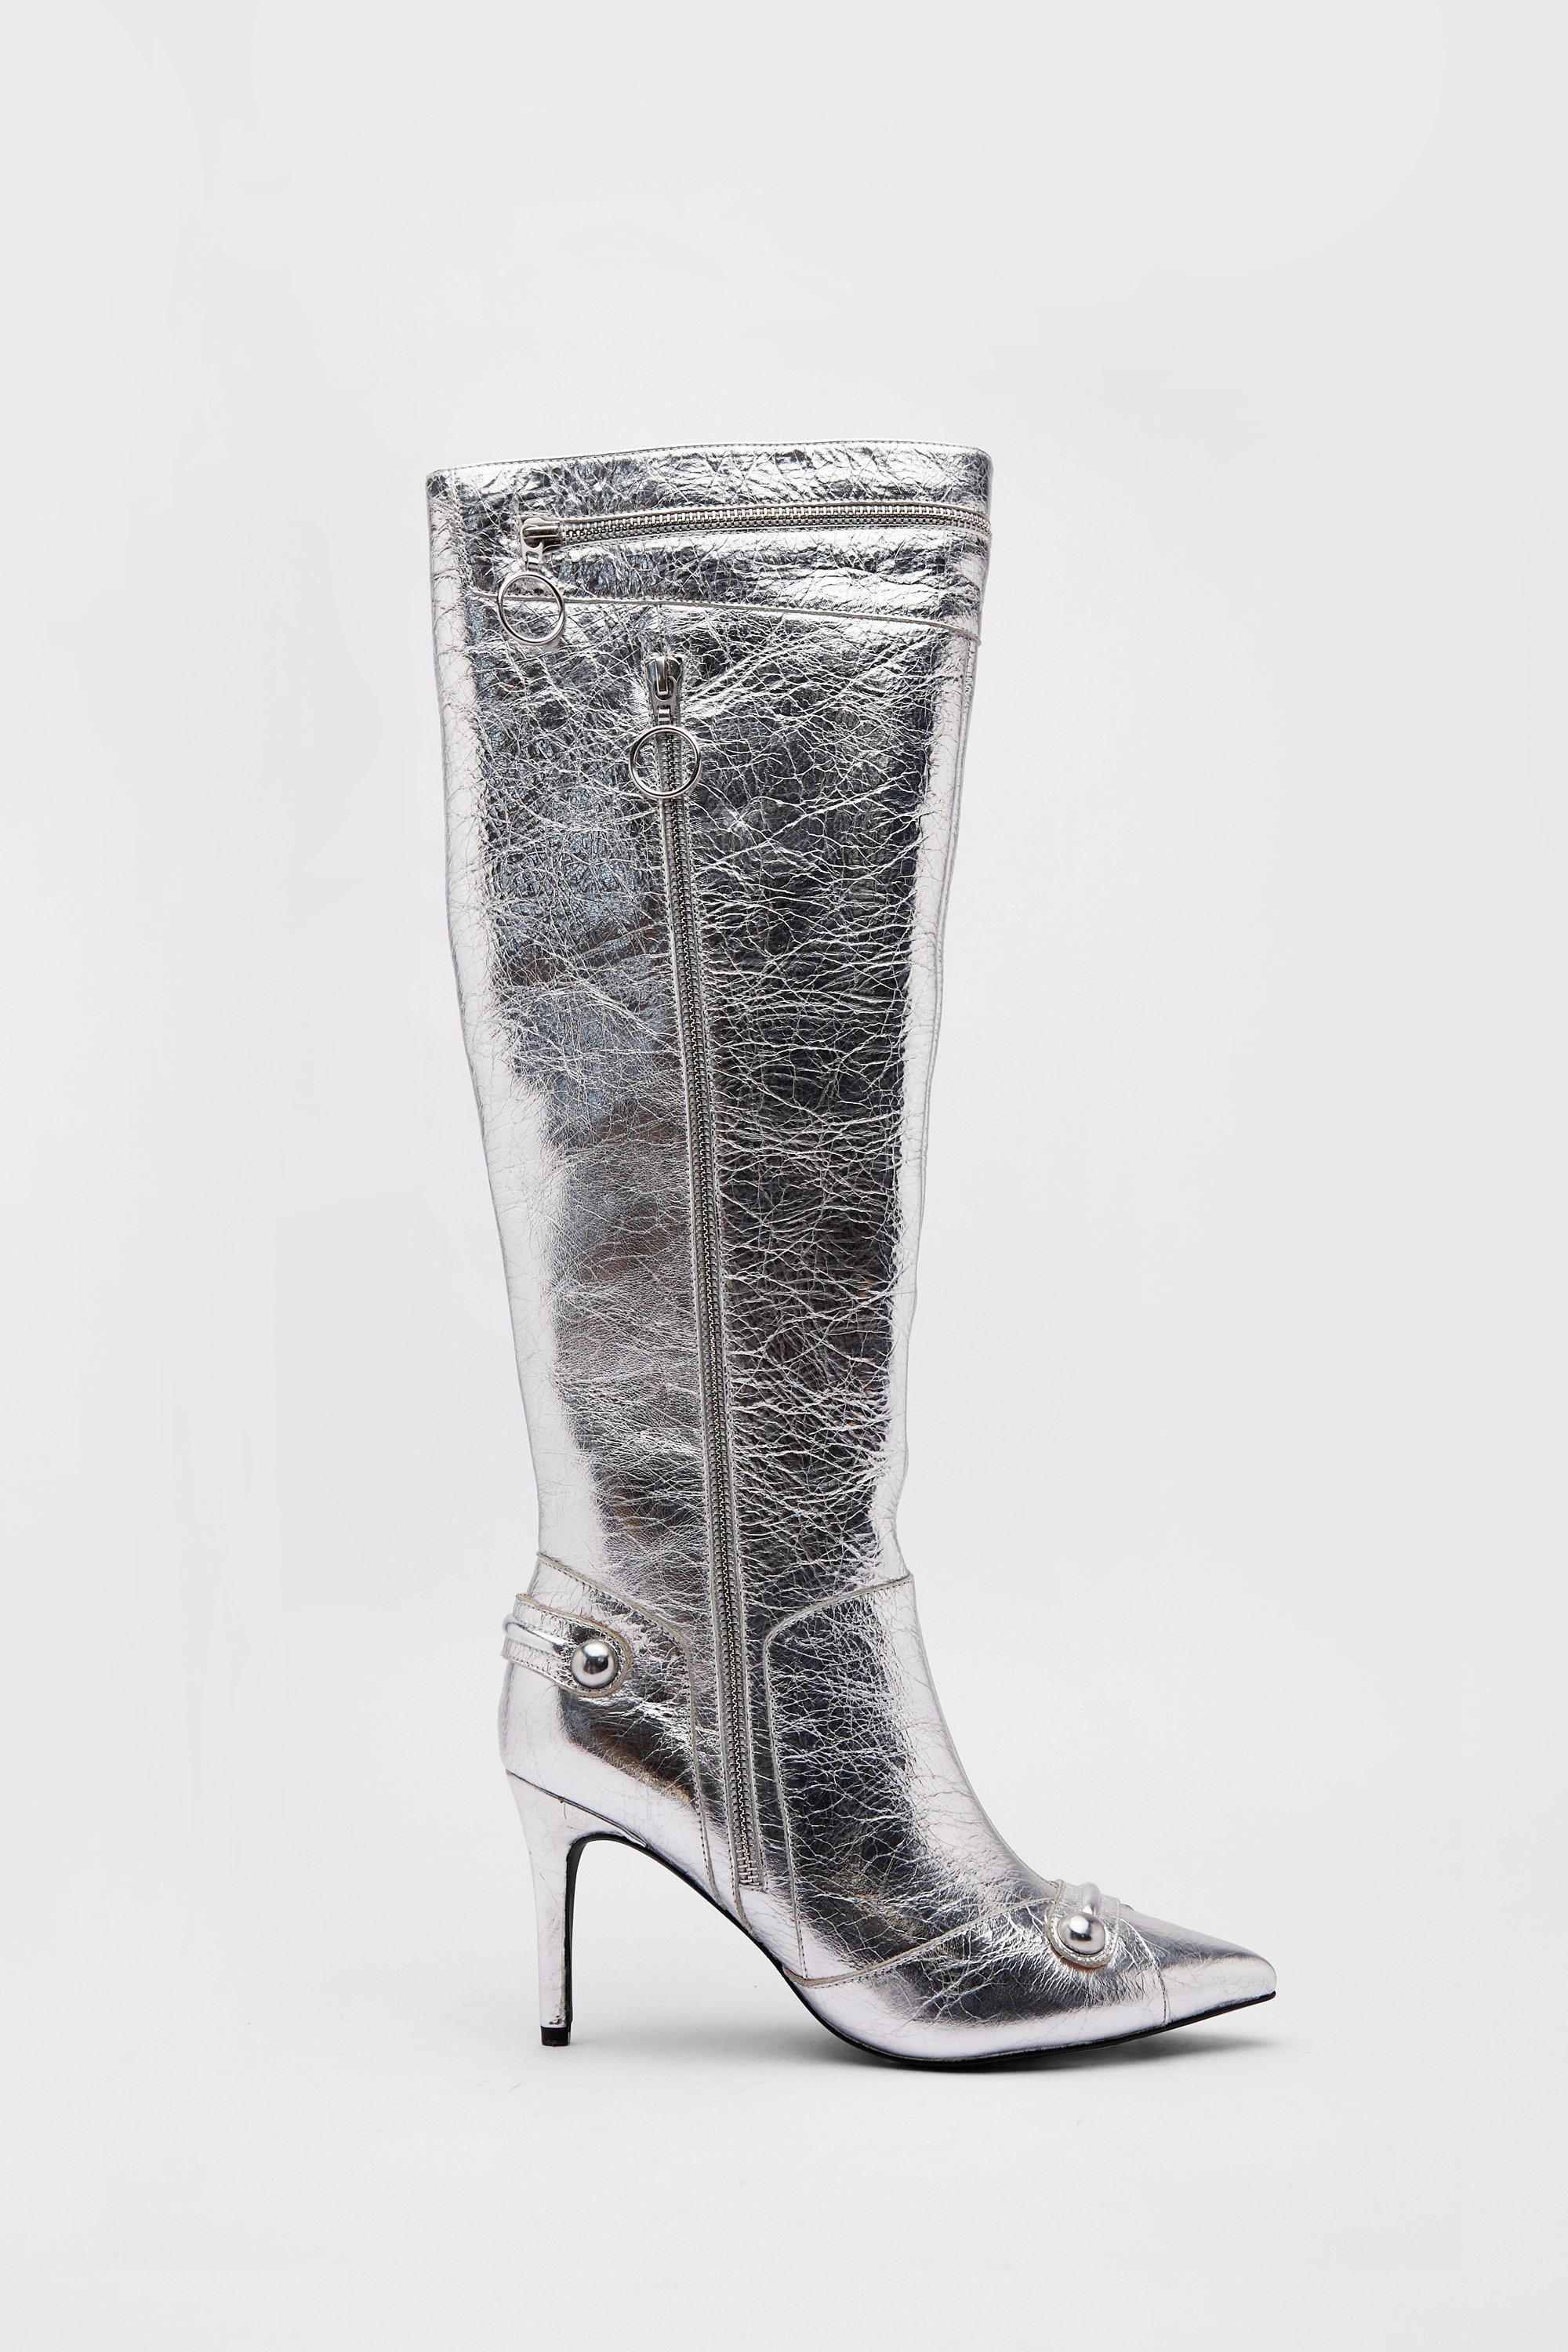 Boots | Leather Metallic Zip & Stud Pointed Toe Knee High Boots | Warehouse | Warehouse UK & IE